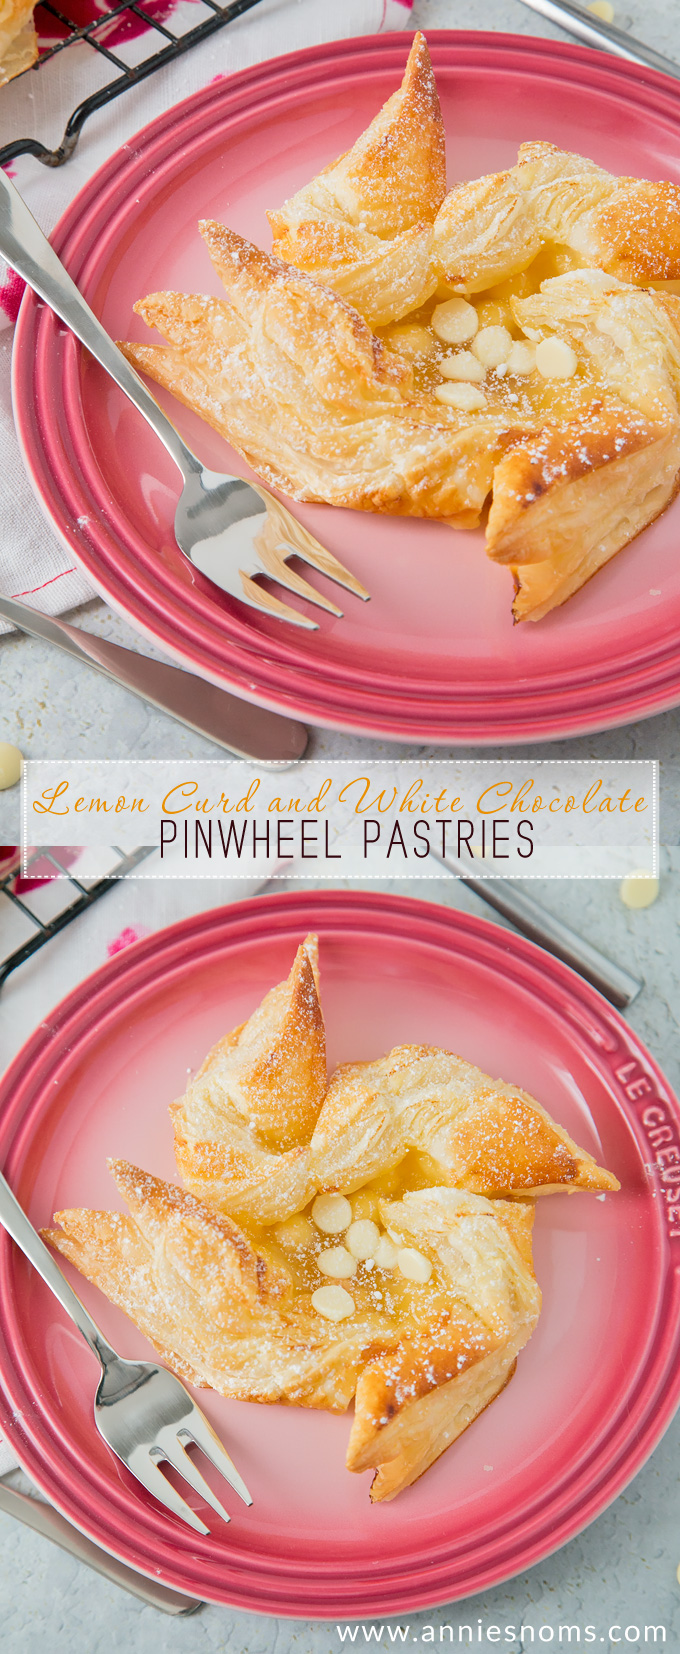 These gorgeous Lemon Curd and White Chocolate Pinwheel Pastries are ready in under 30 minutes and only require 4 ingredients! 